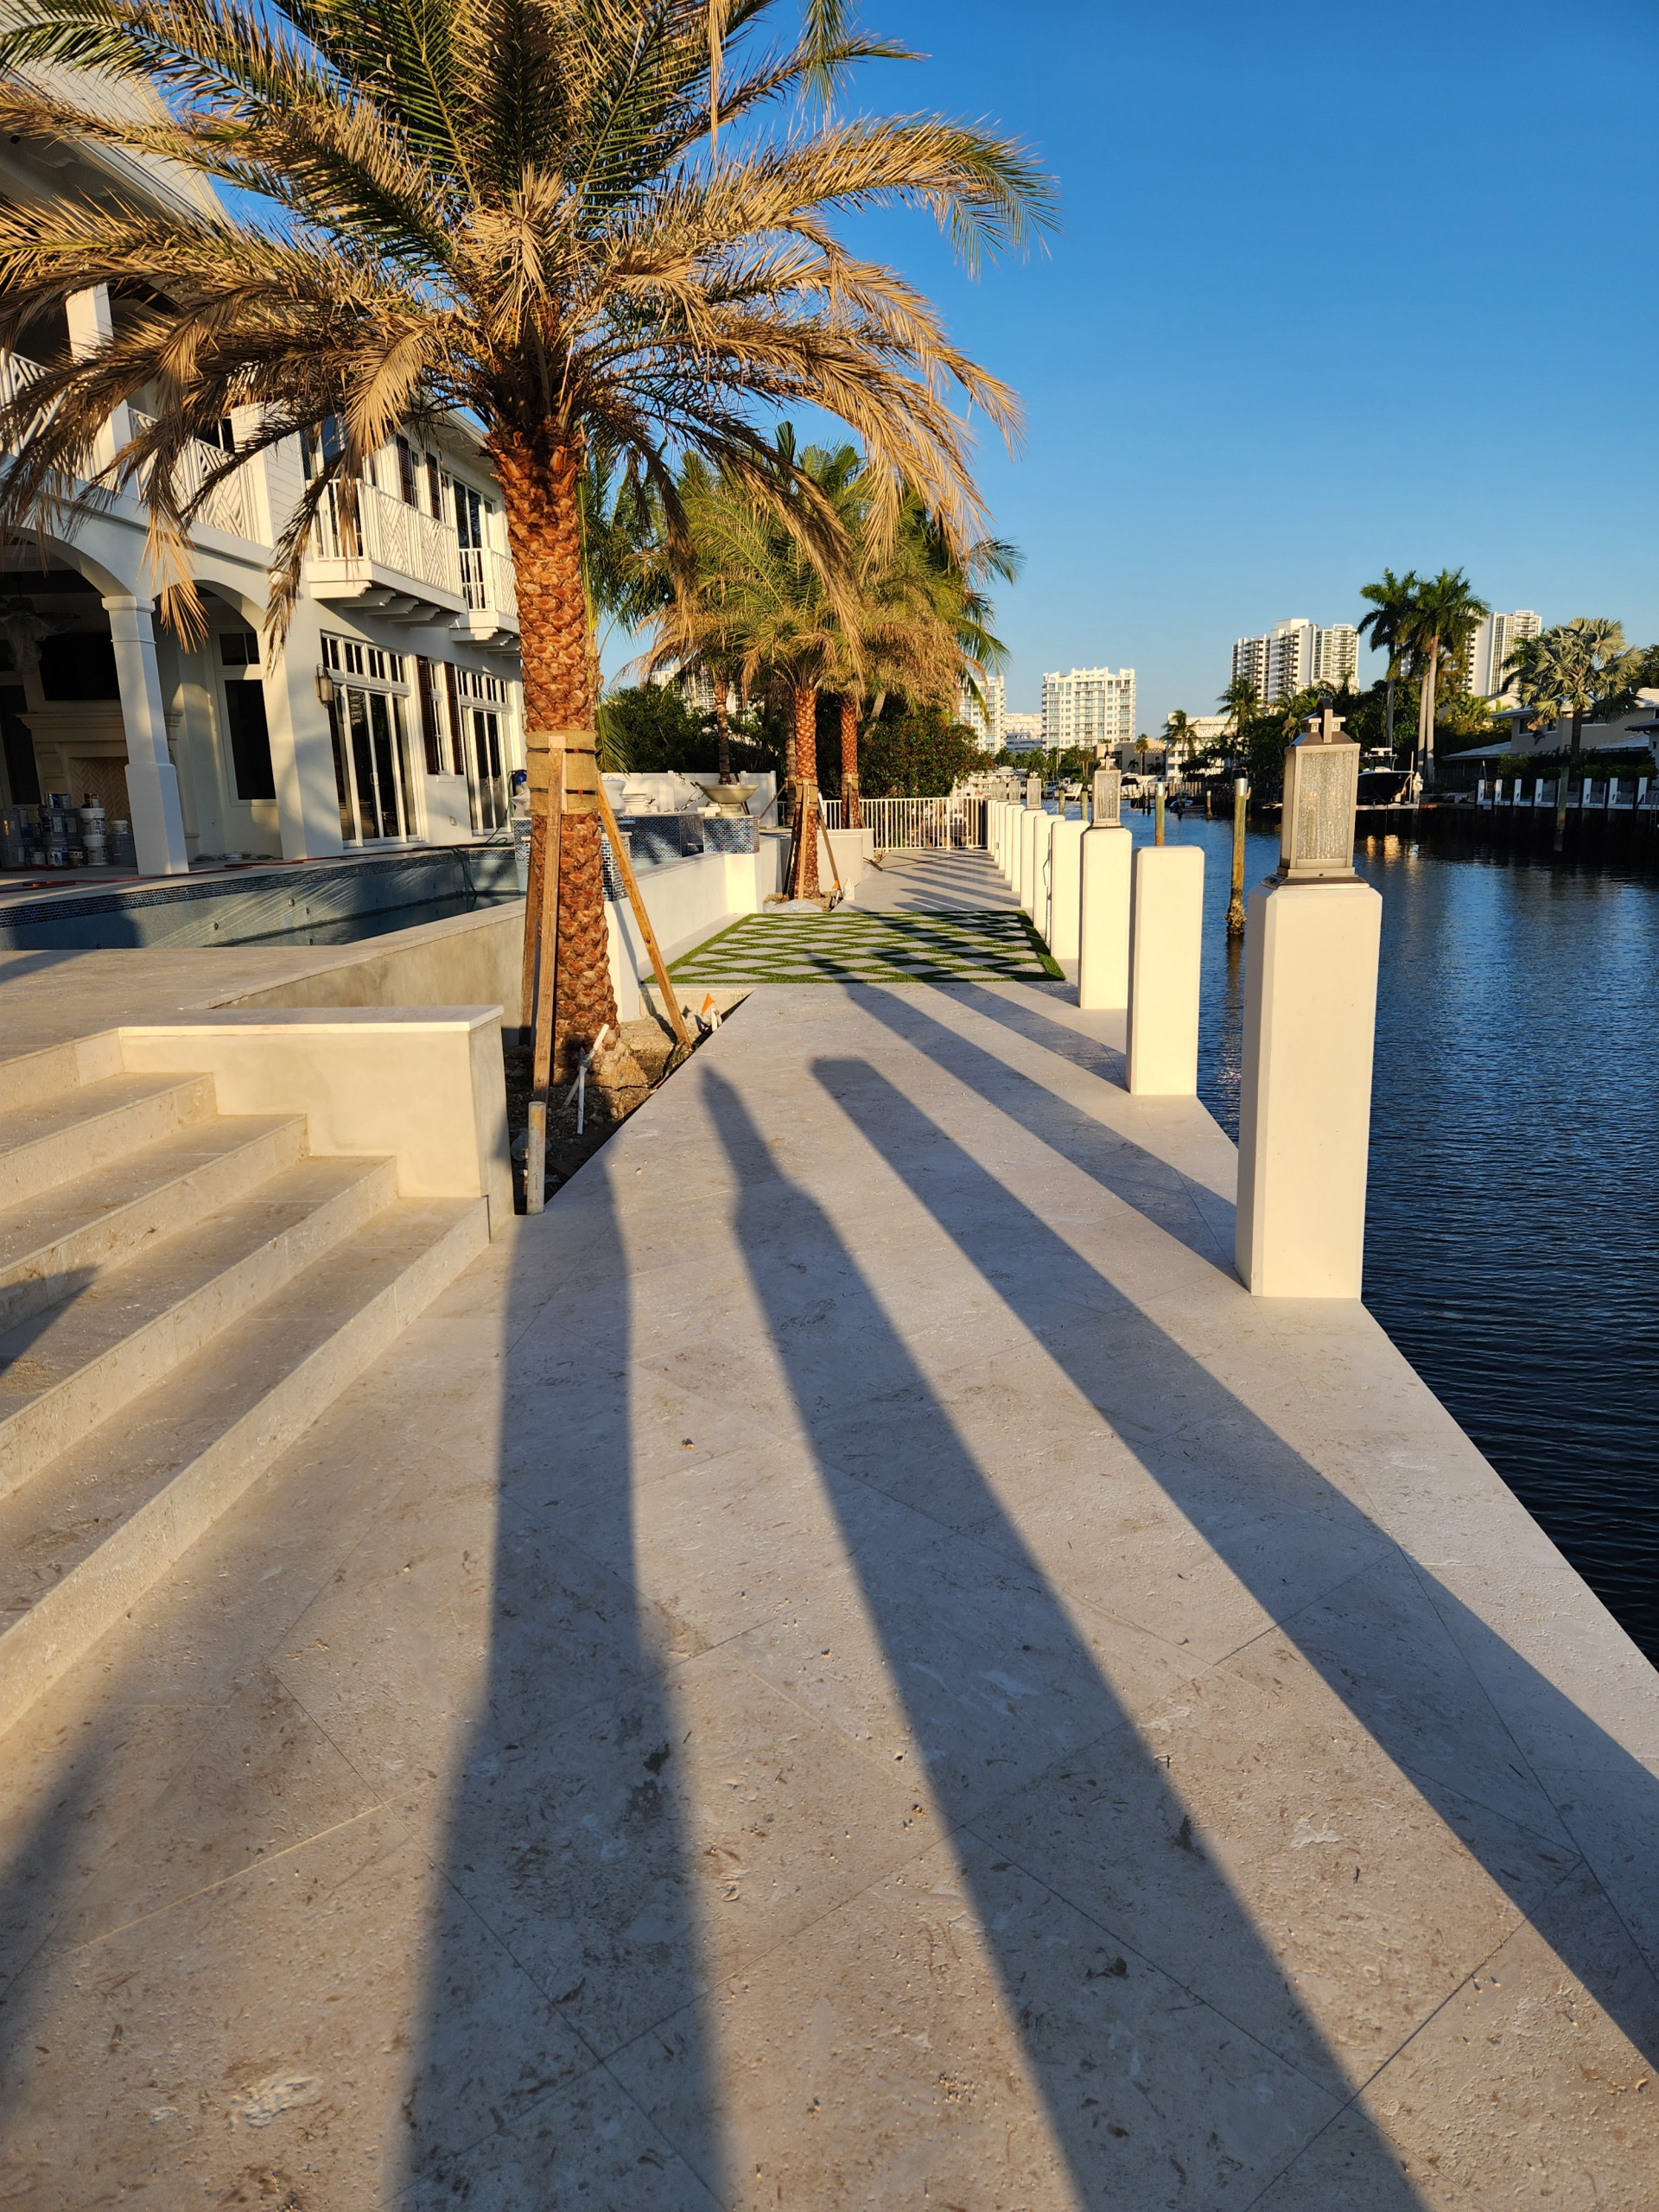 Exterior Stone and Turf Installation - Fort Lauderdale